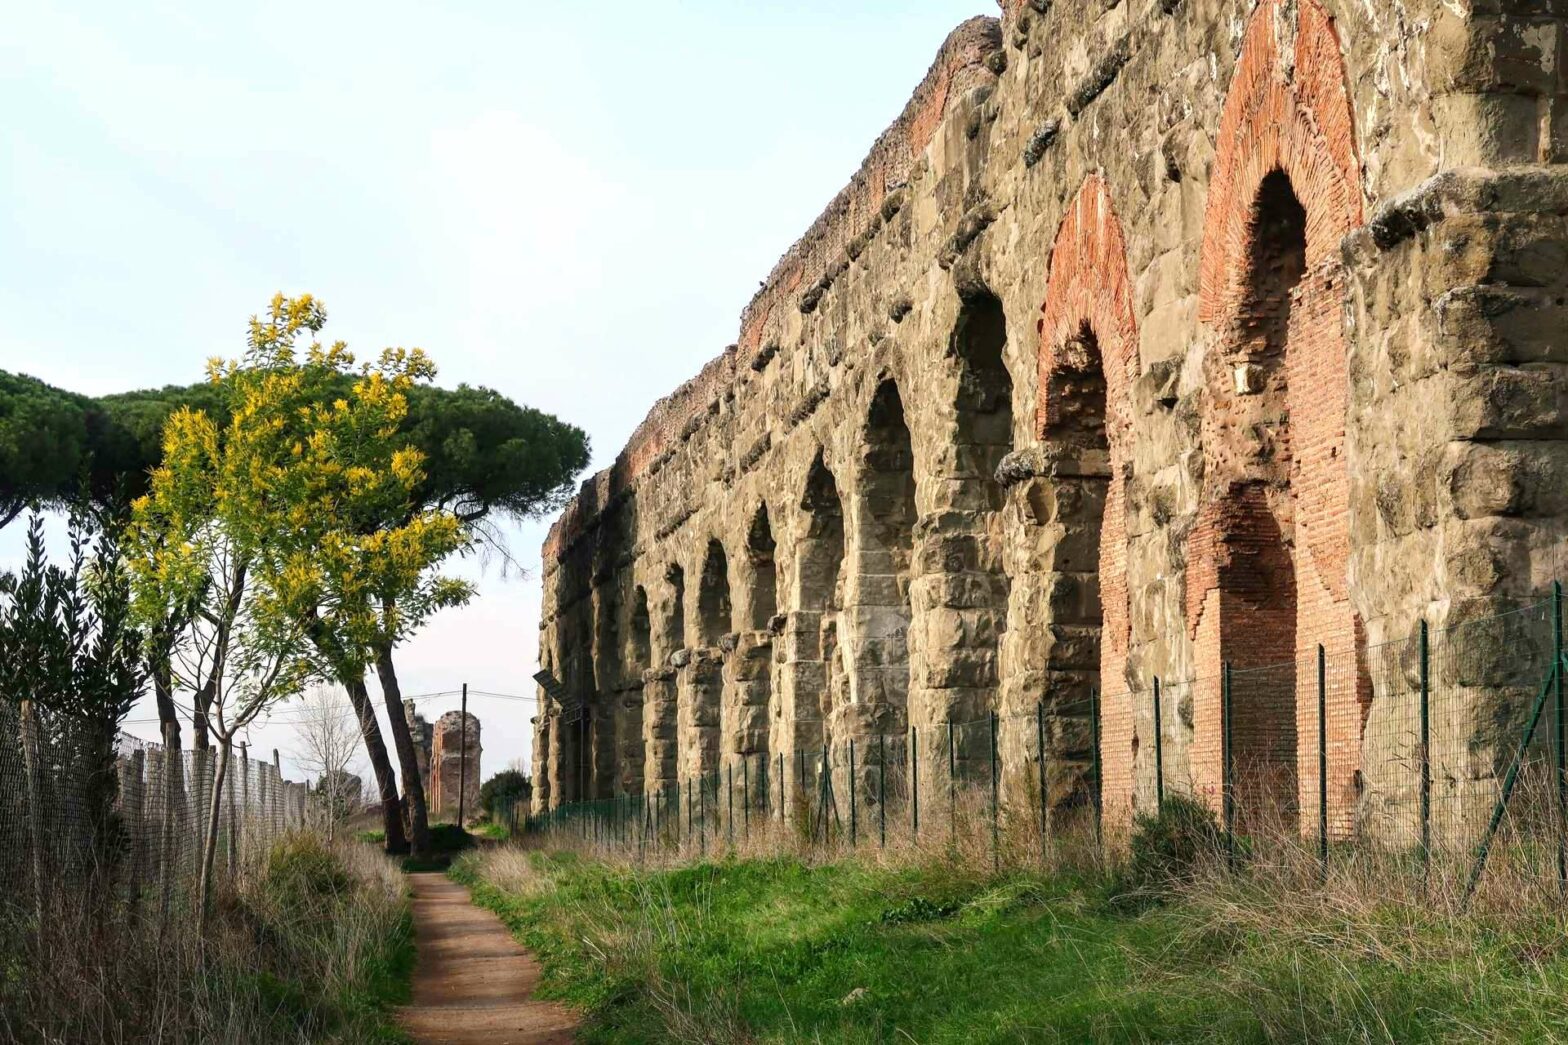 A path by an aqueduct in the Park of the Aqueducts in Rome